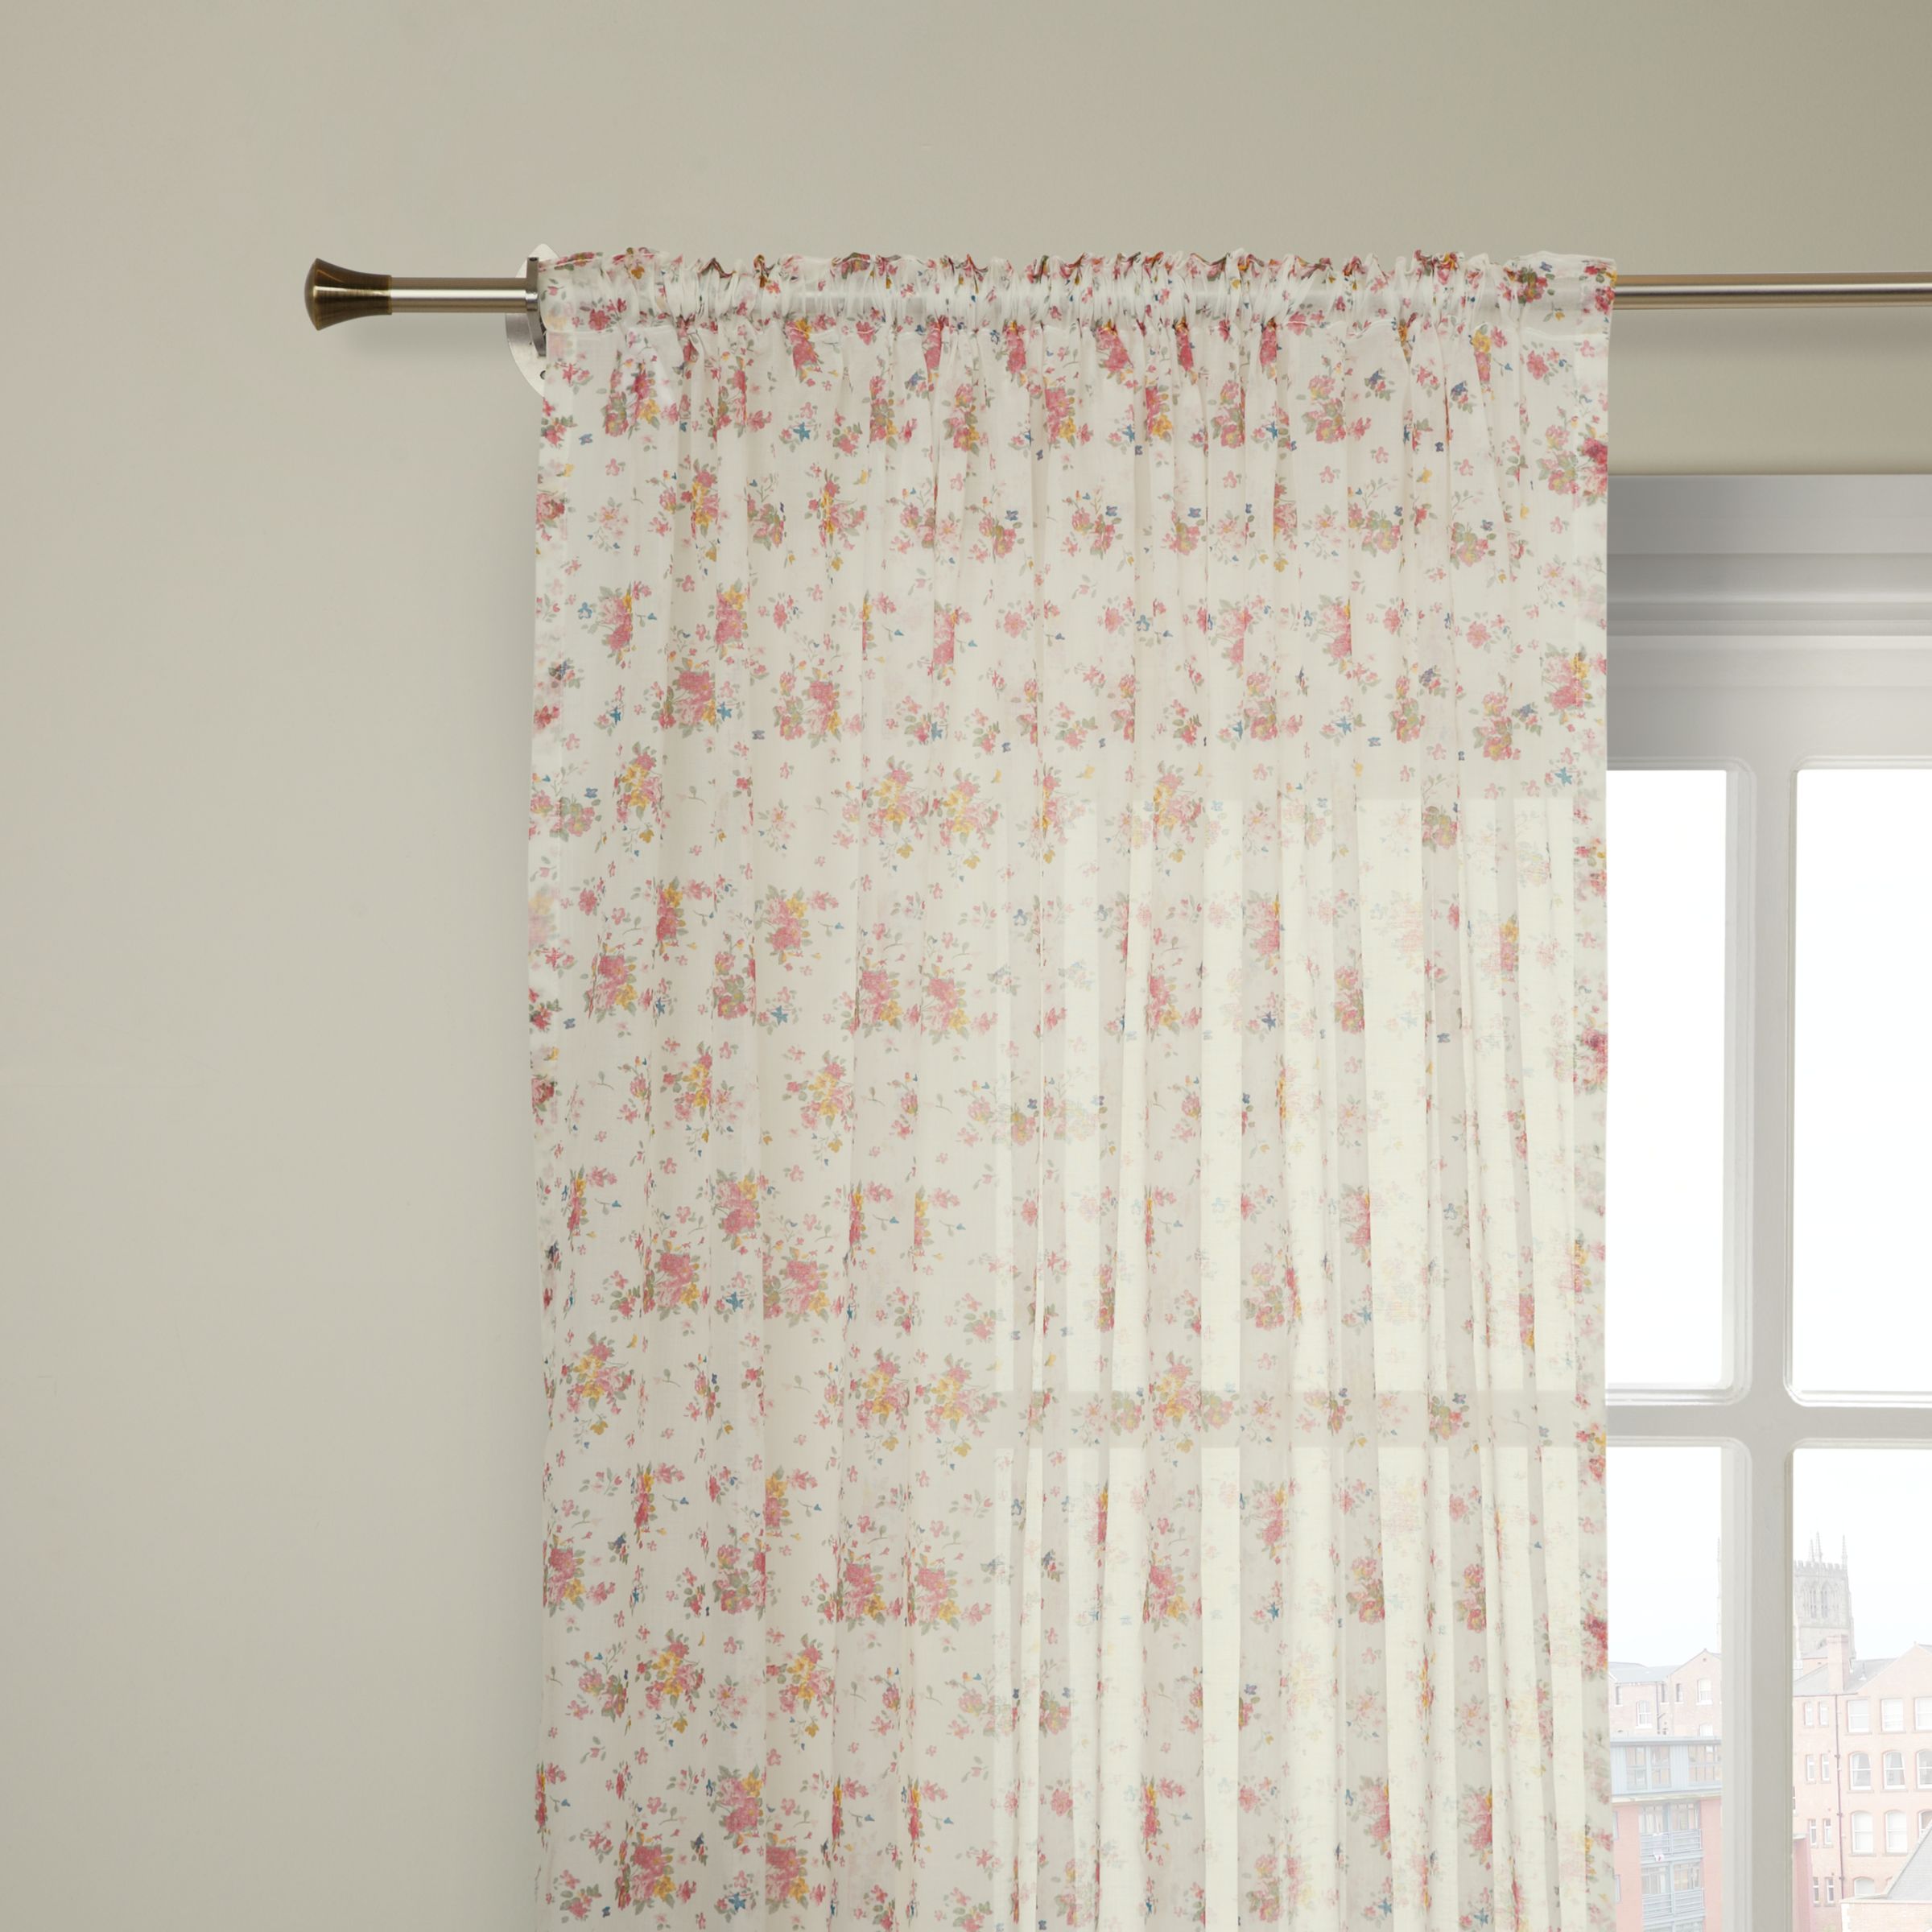 Ditsy Floral Voile Panel, Multi 390189